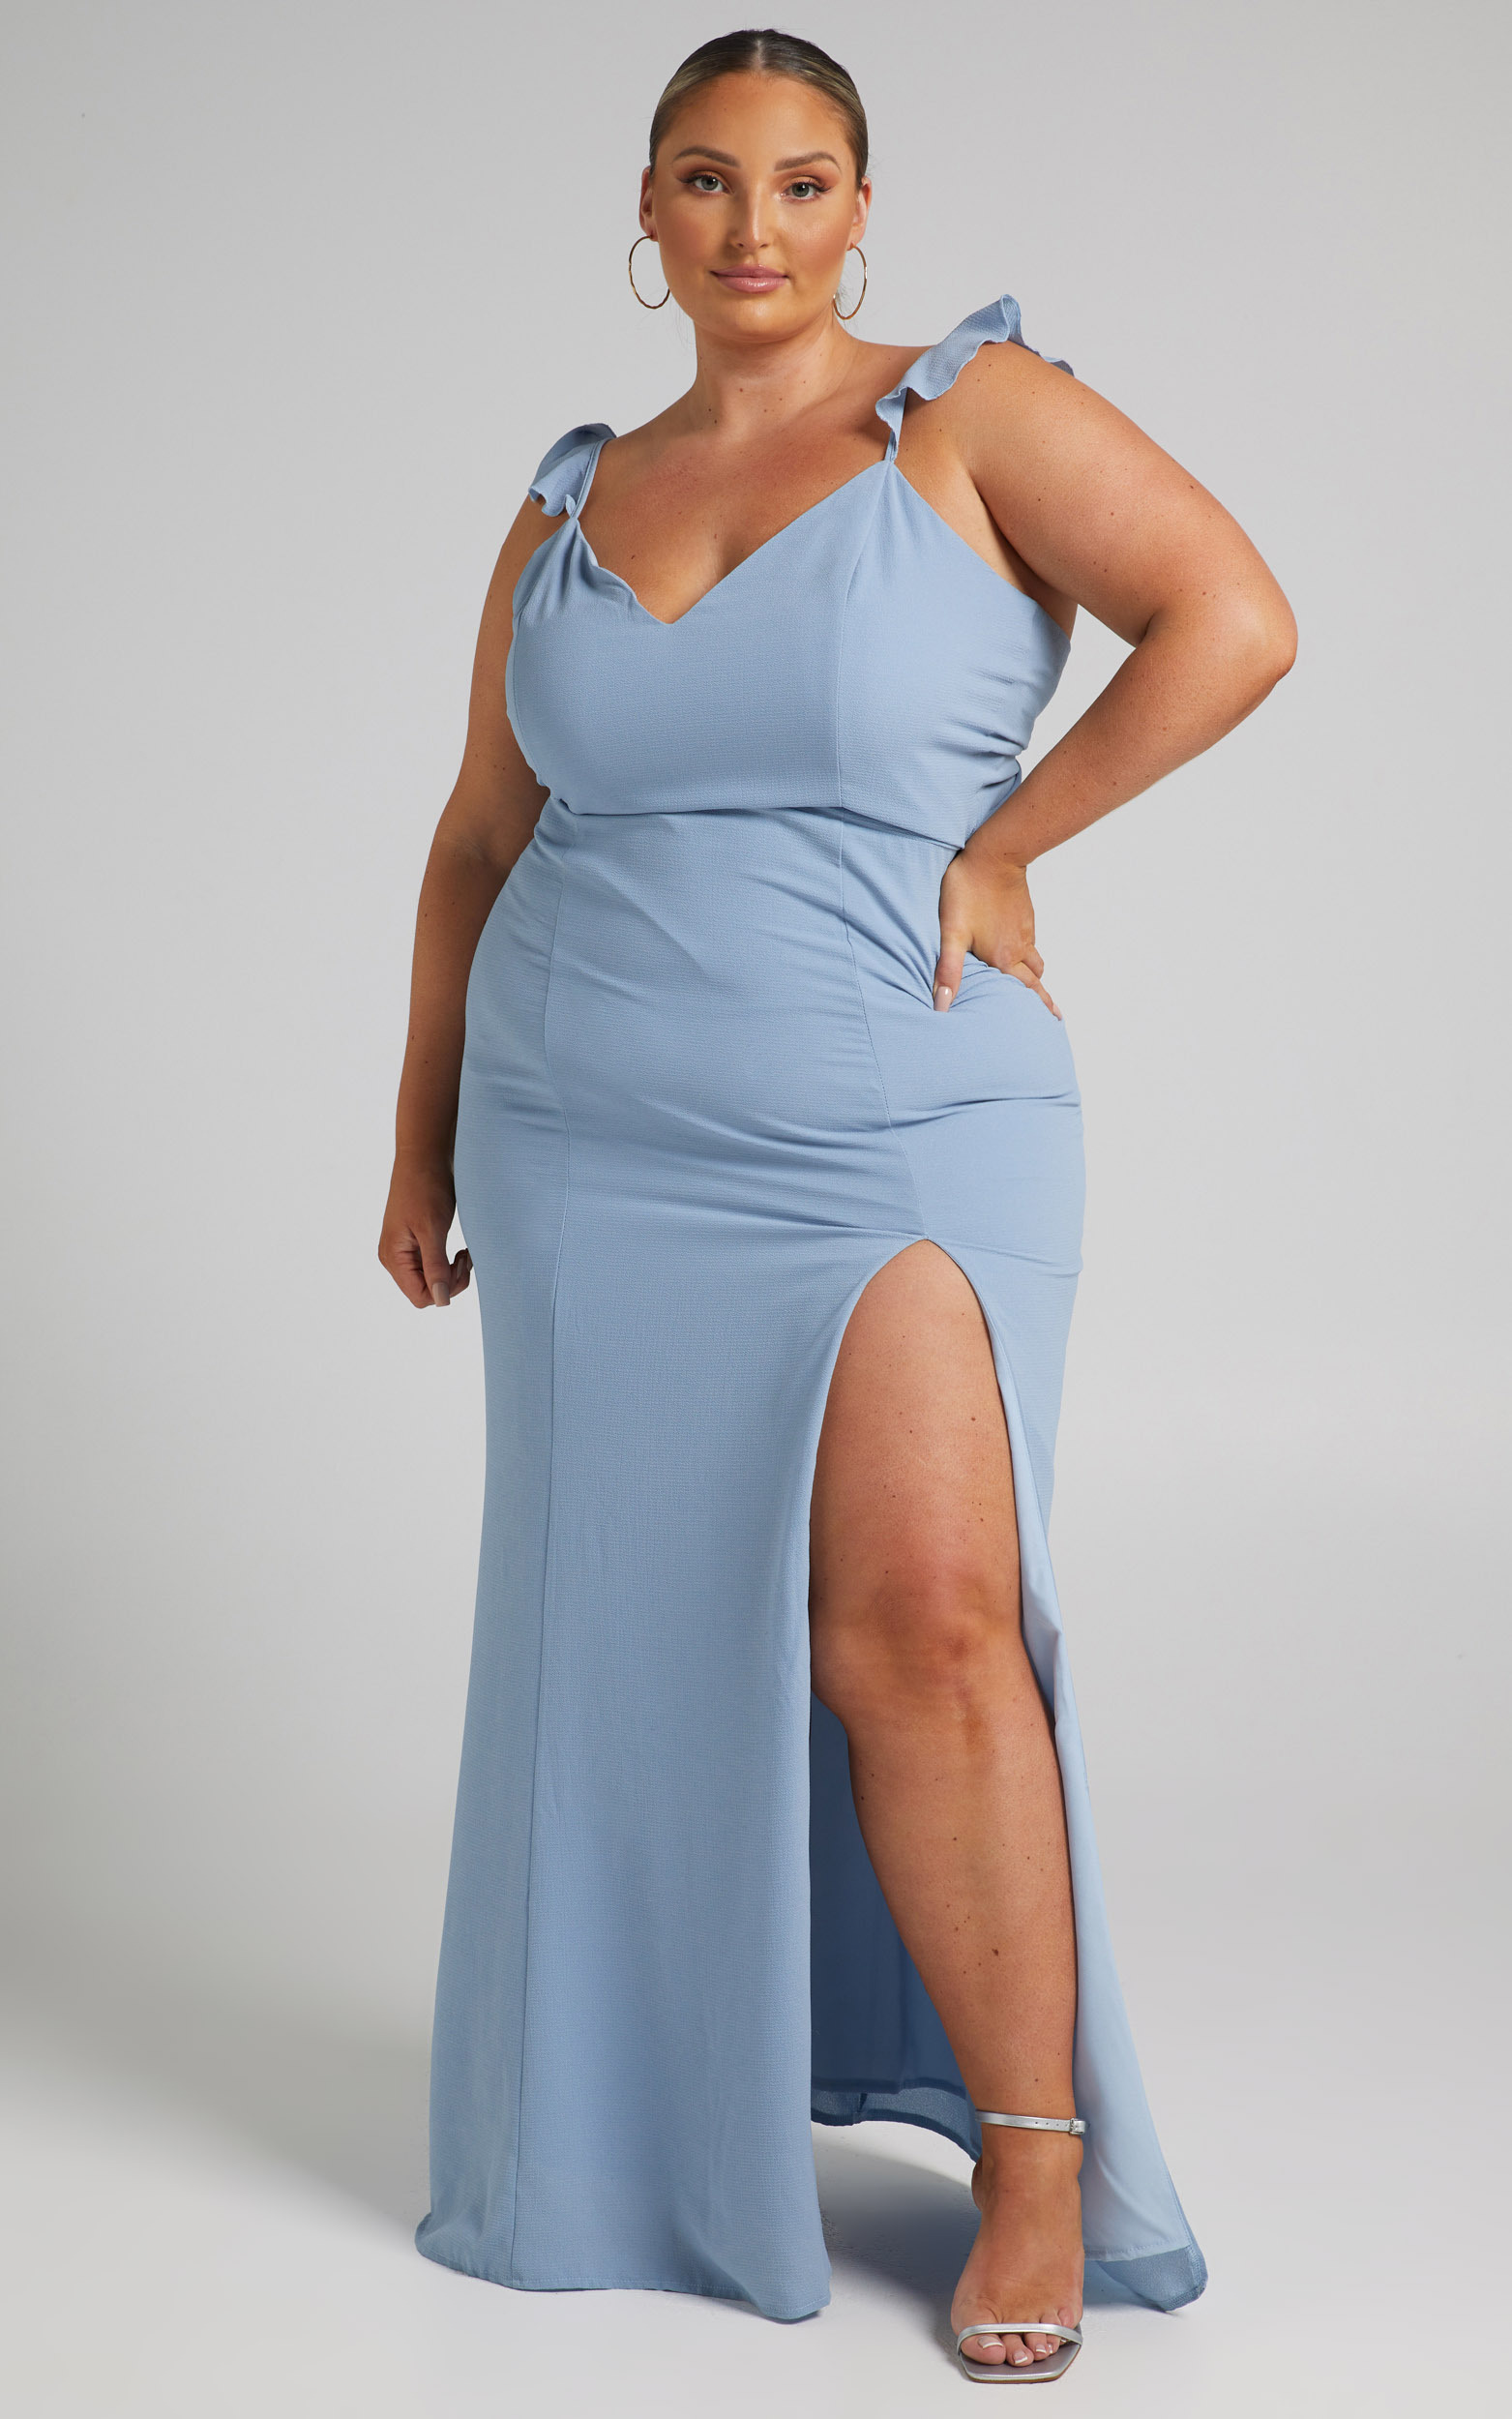 More Than This Ruffle Strap Maxi Dress in Light Blue - 08, BLU3, hi-res image number null